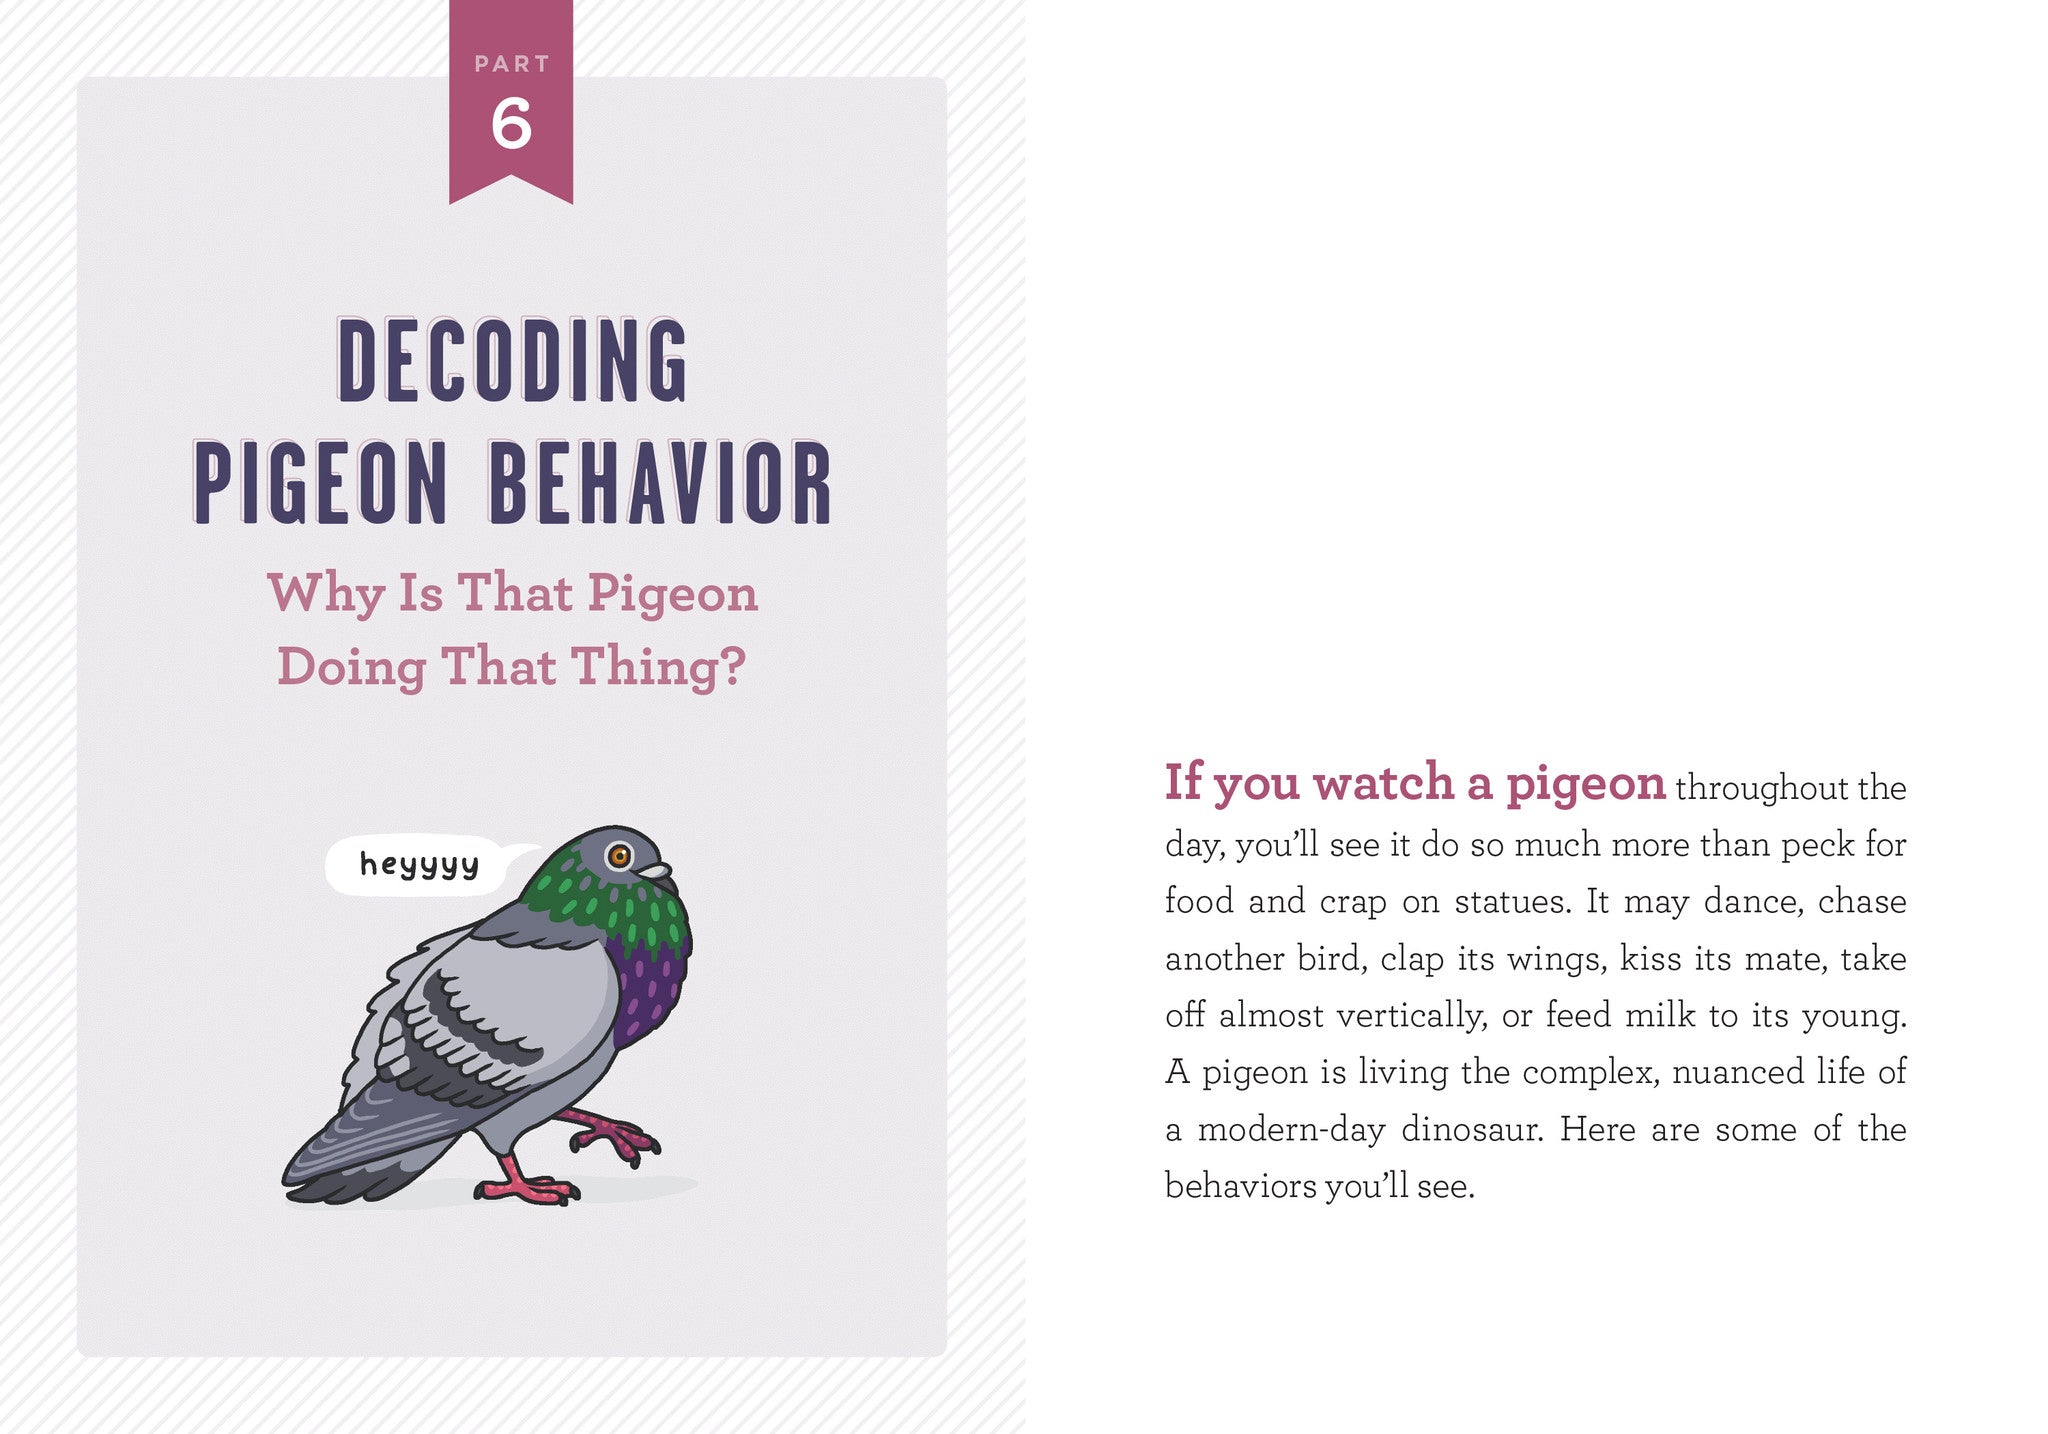 a-pocket-guide-to-pigeon-watching-01.jpg